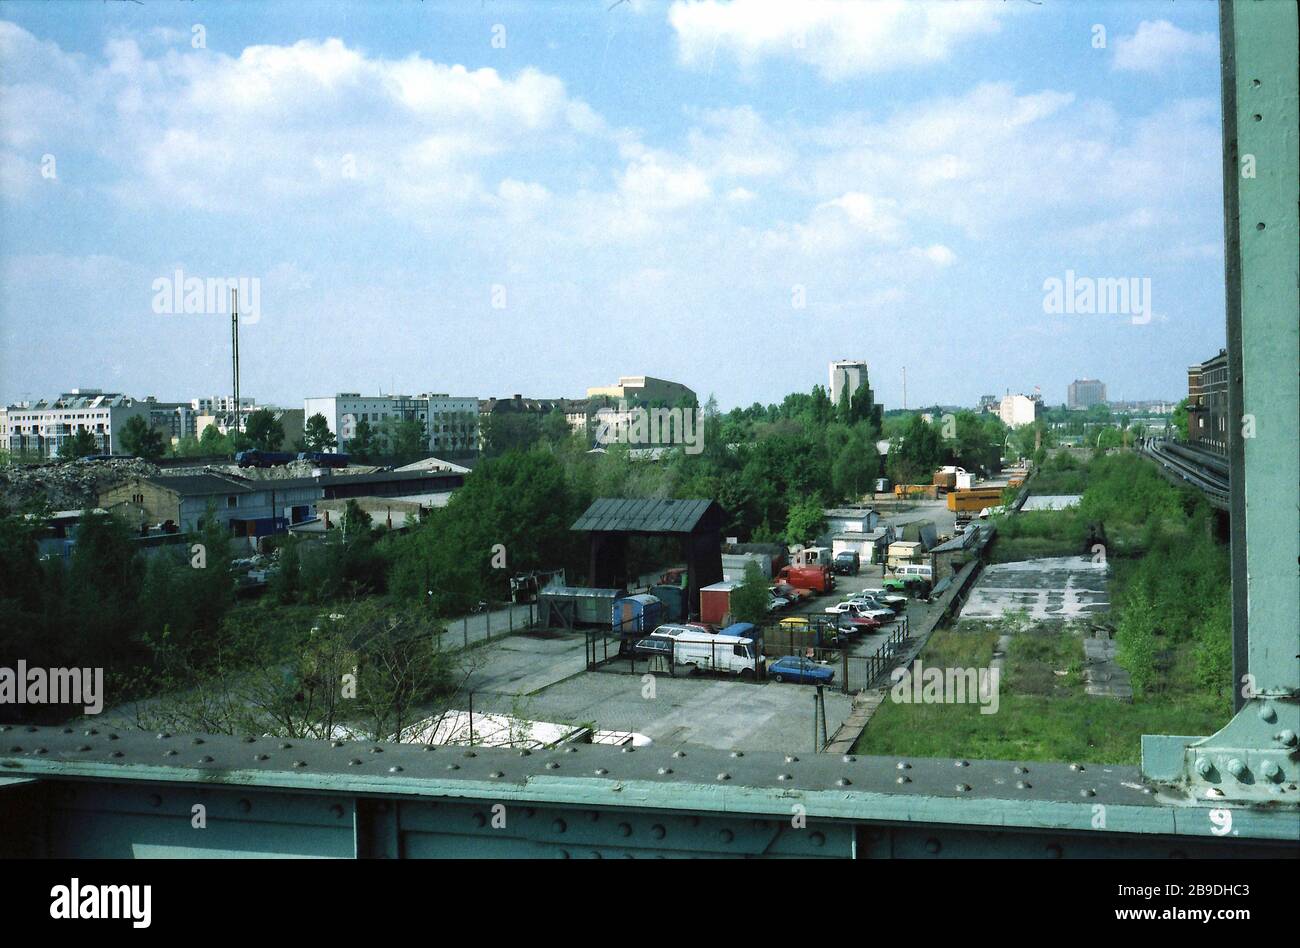 View Of The Double Track Underground Line To Potsdamer Platz Next To The Facade Of The